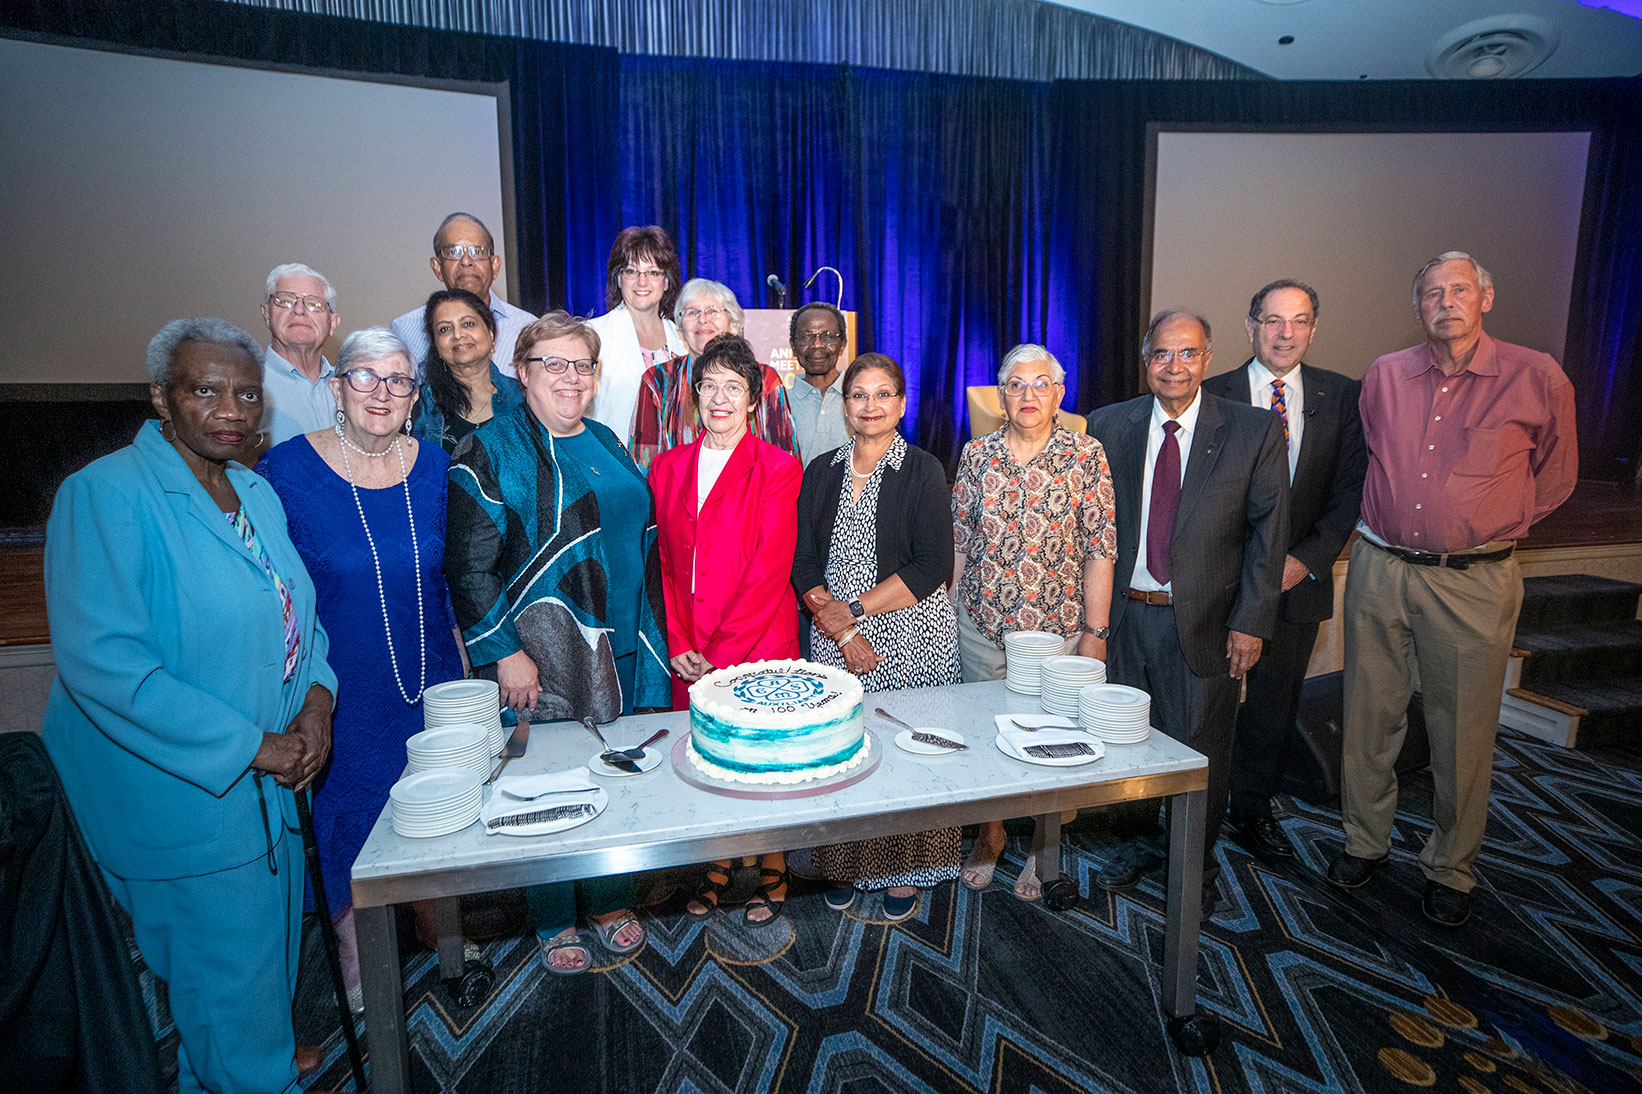 ASME Auxiliary 100th Anniversary meeting